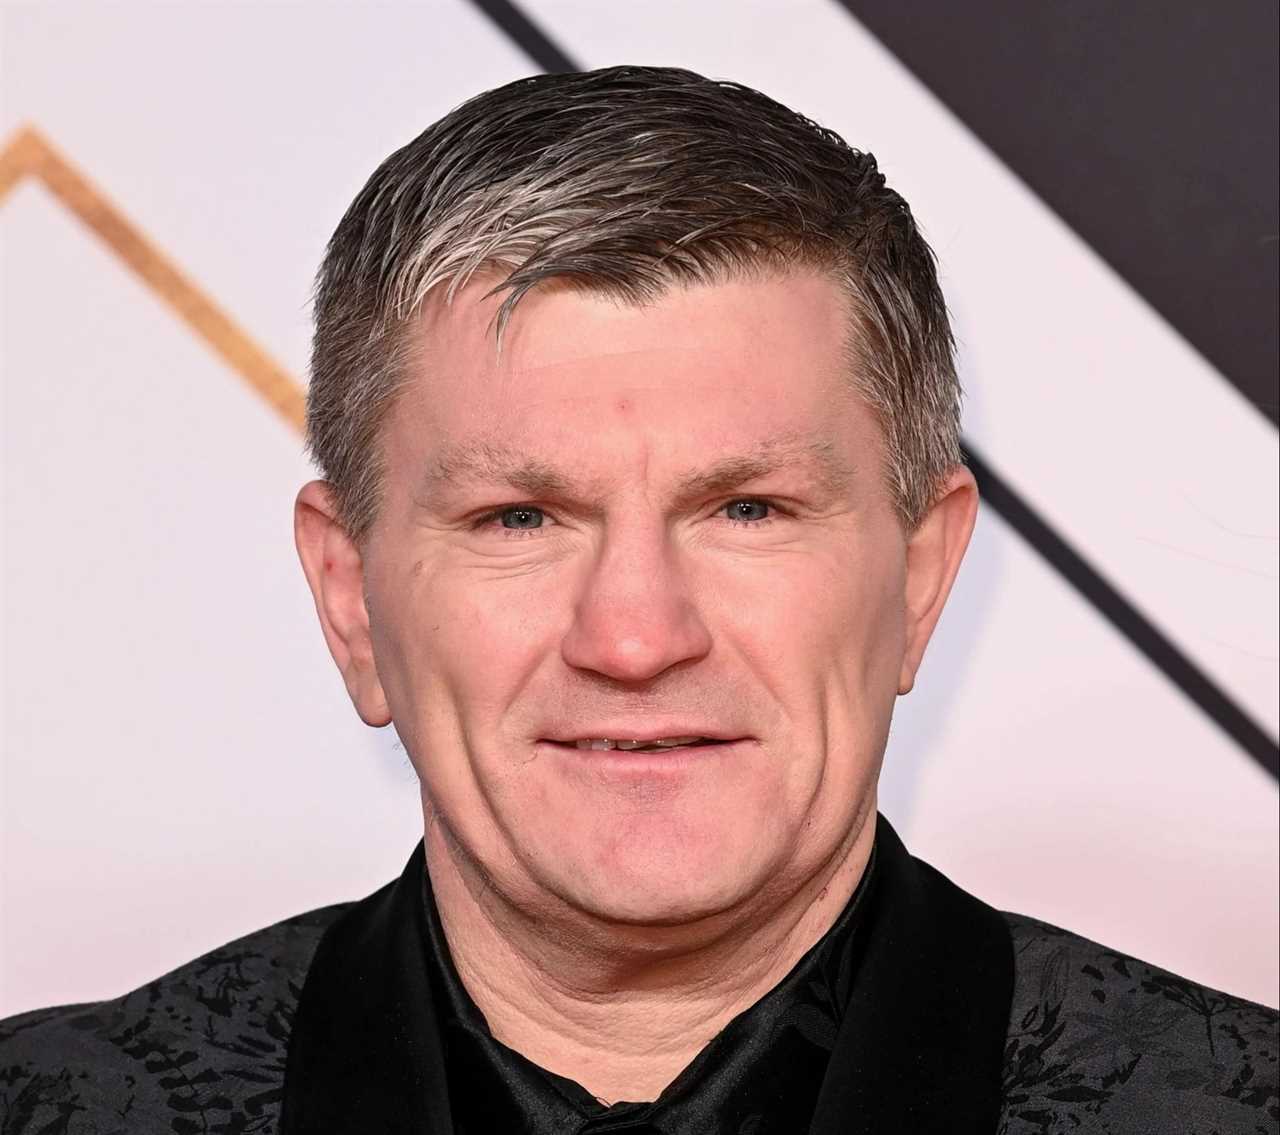 Ricky Hatton documentary to show 'depression and addiction' which led ex-boxer to consider suicide